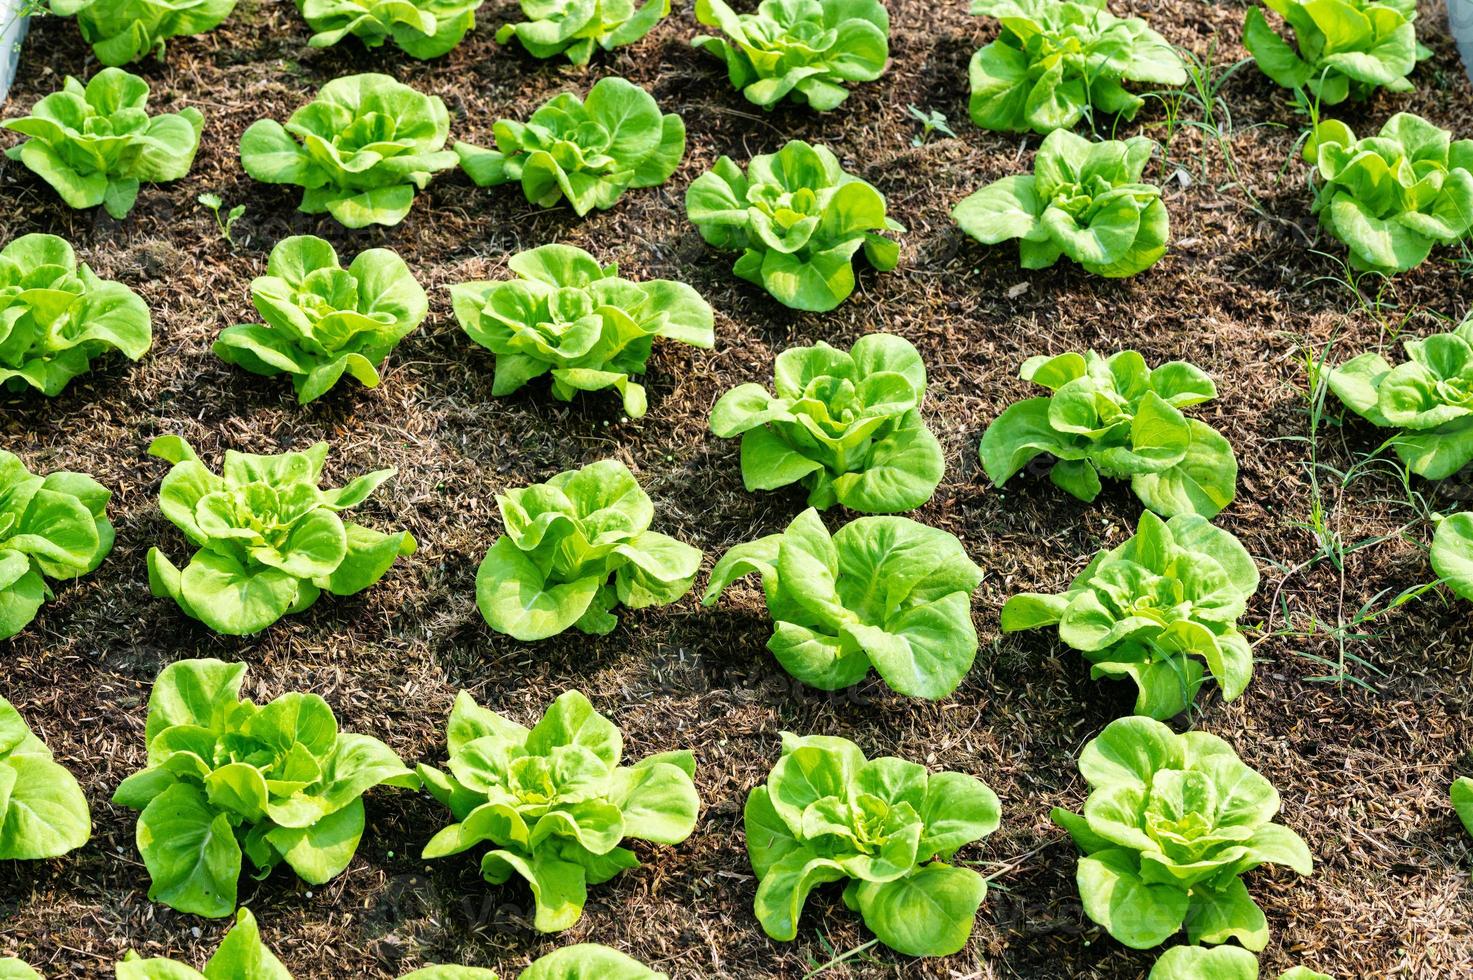 Organic hydroponic vegetable cultivation farm. lettuce crops growing photo